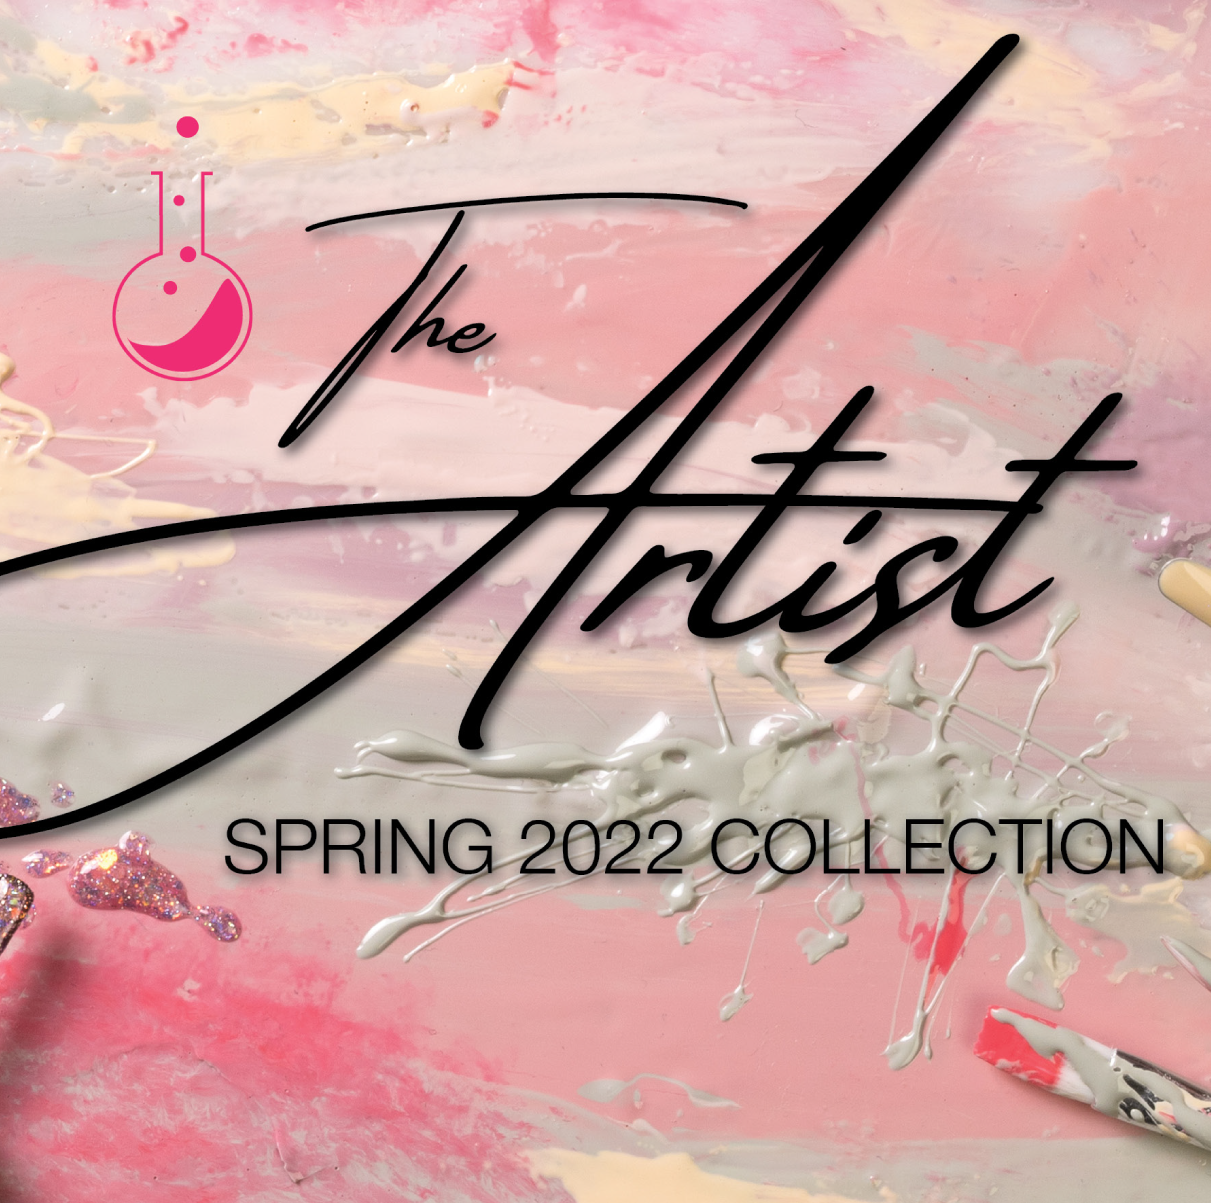 LE's NEW Spring 2022 Collection, The Artist,  is Featured in Scratch Magazine